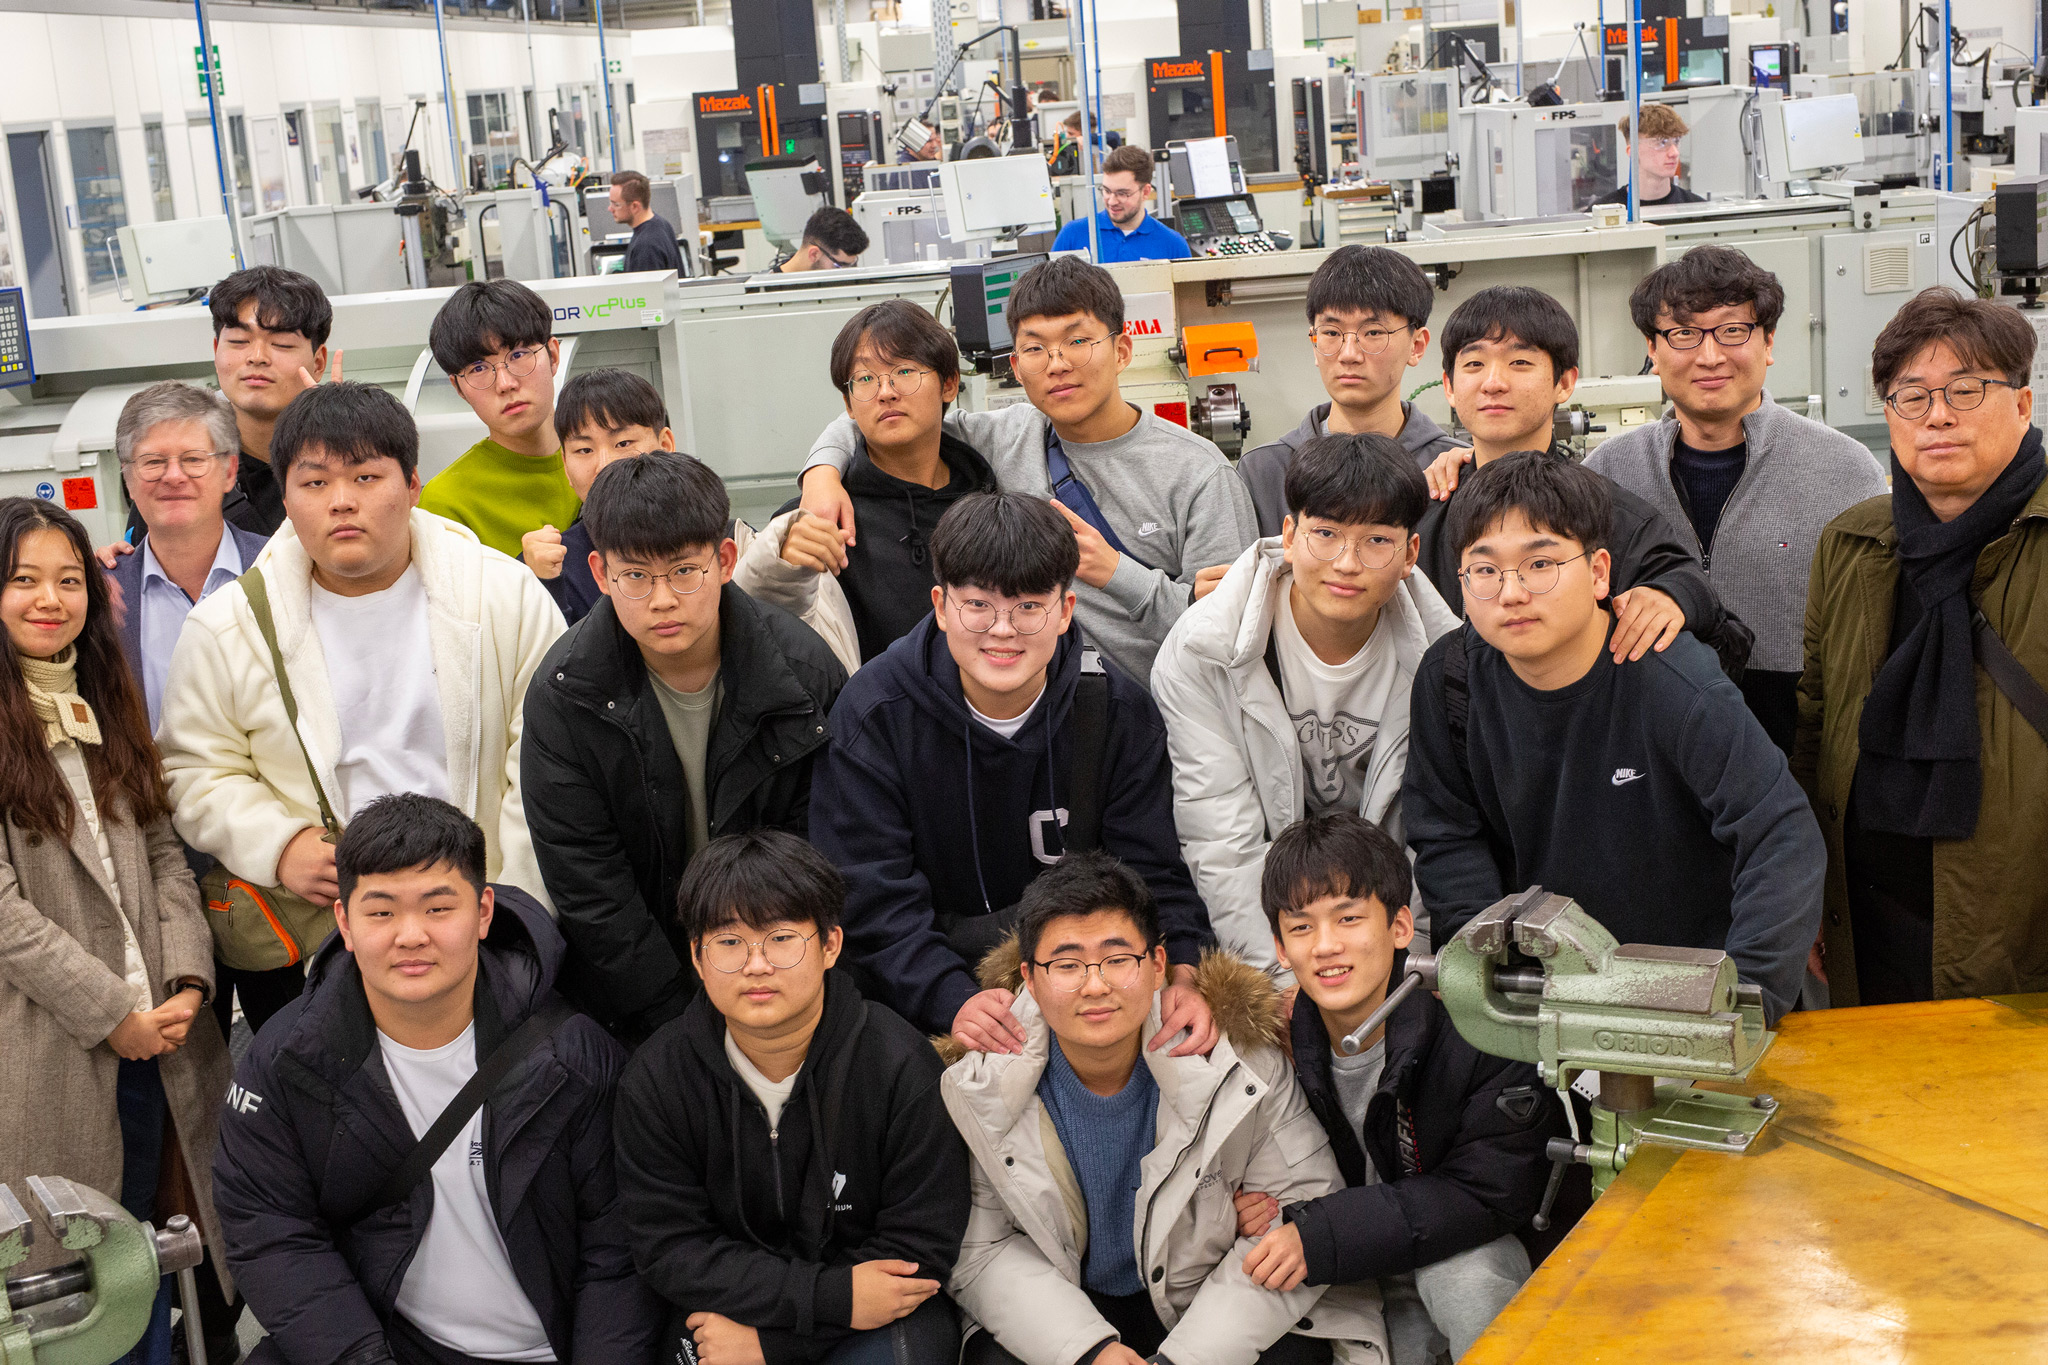 A group of vocational students and teachers from South Korea visited the MAPAL training centre.